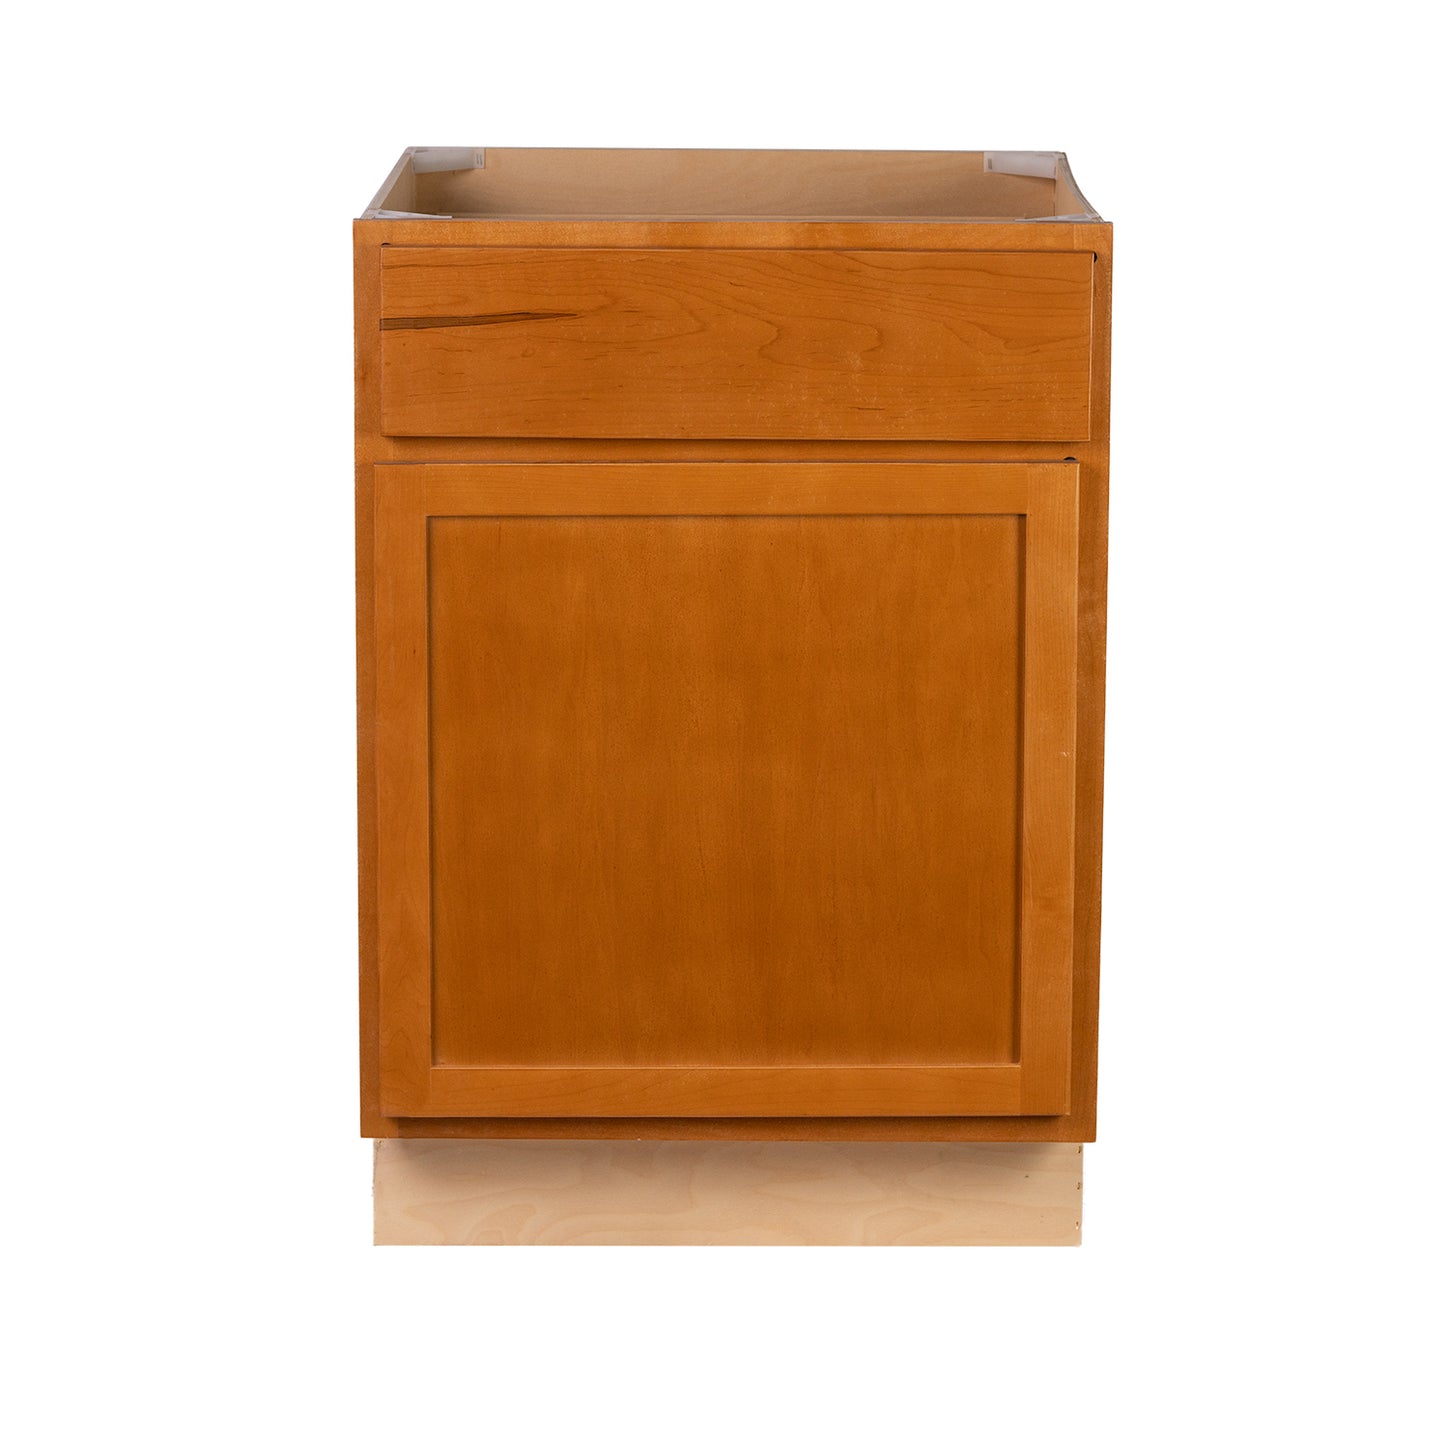 Quicklock RTA (Ready-to-Assemble) Provincial Stain Base Cabinet | 18"Wx34.5"Hx24"D